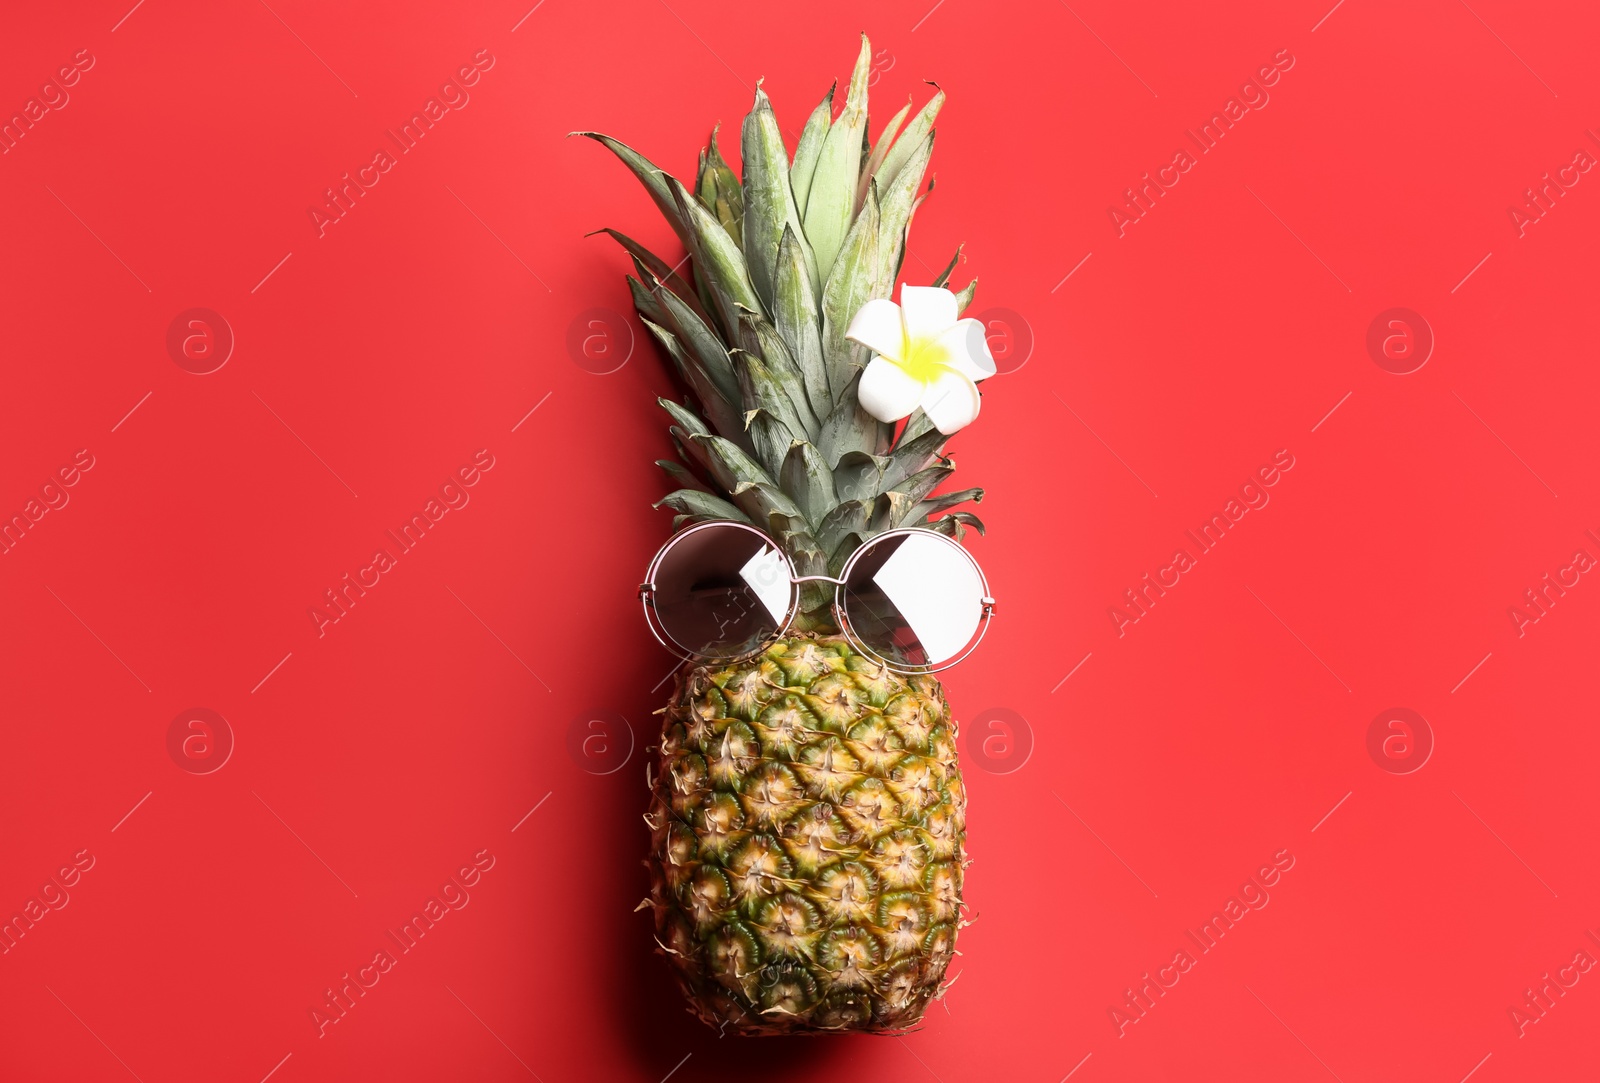 Photo of Pineapple with sunglasses and plumeria flower on red background, top view. Creative concept